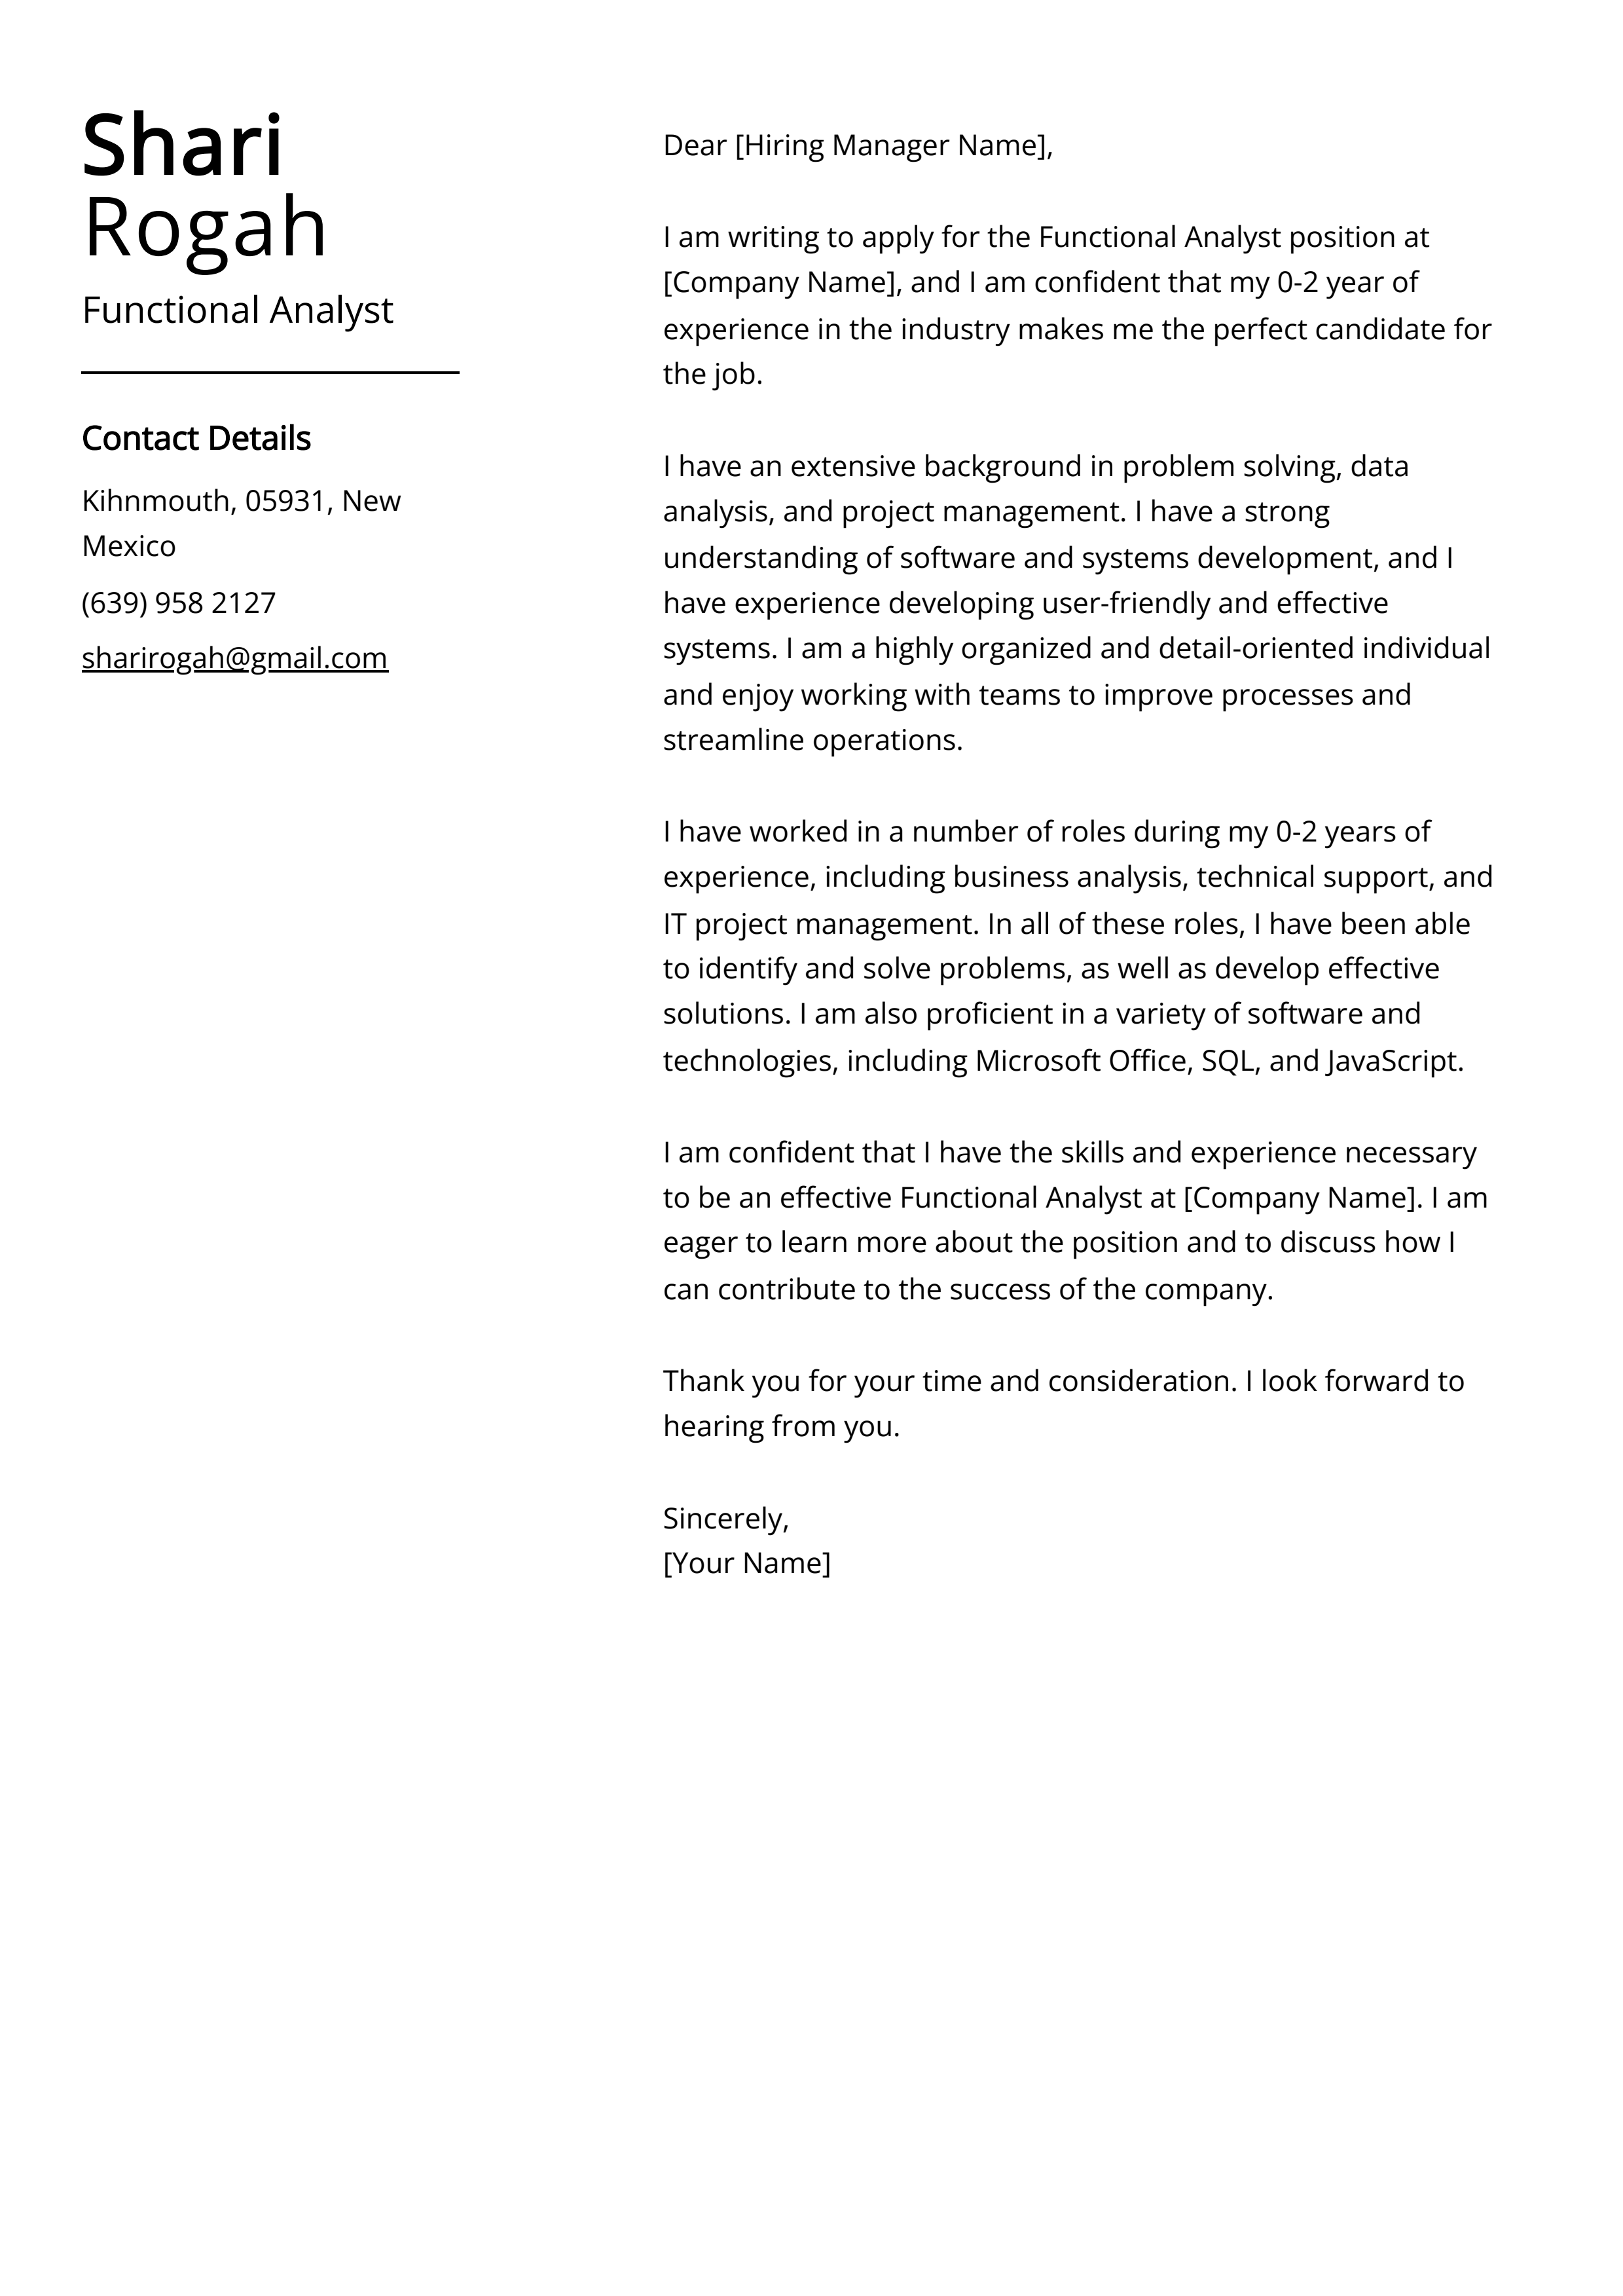 Functional Analyst Cover Letter Example